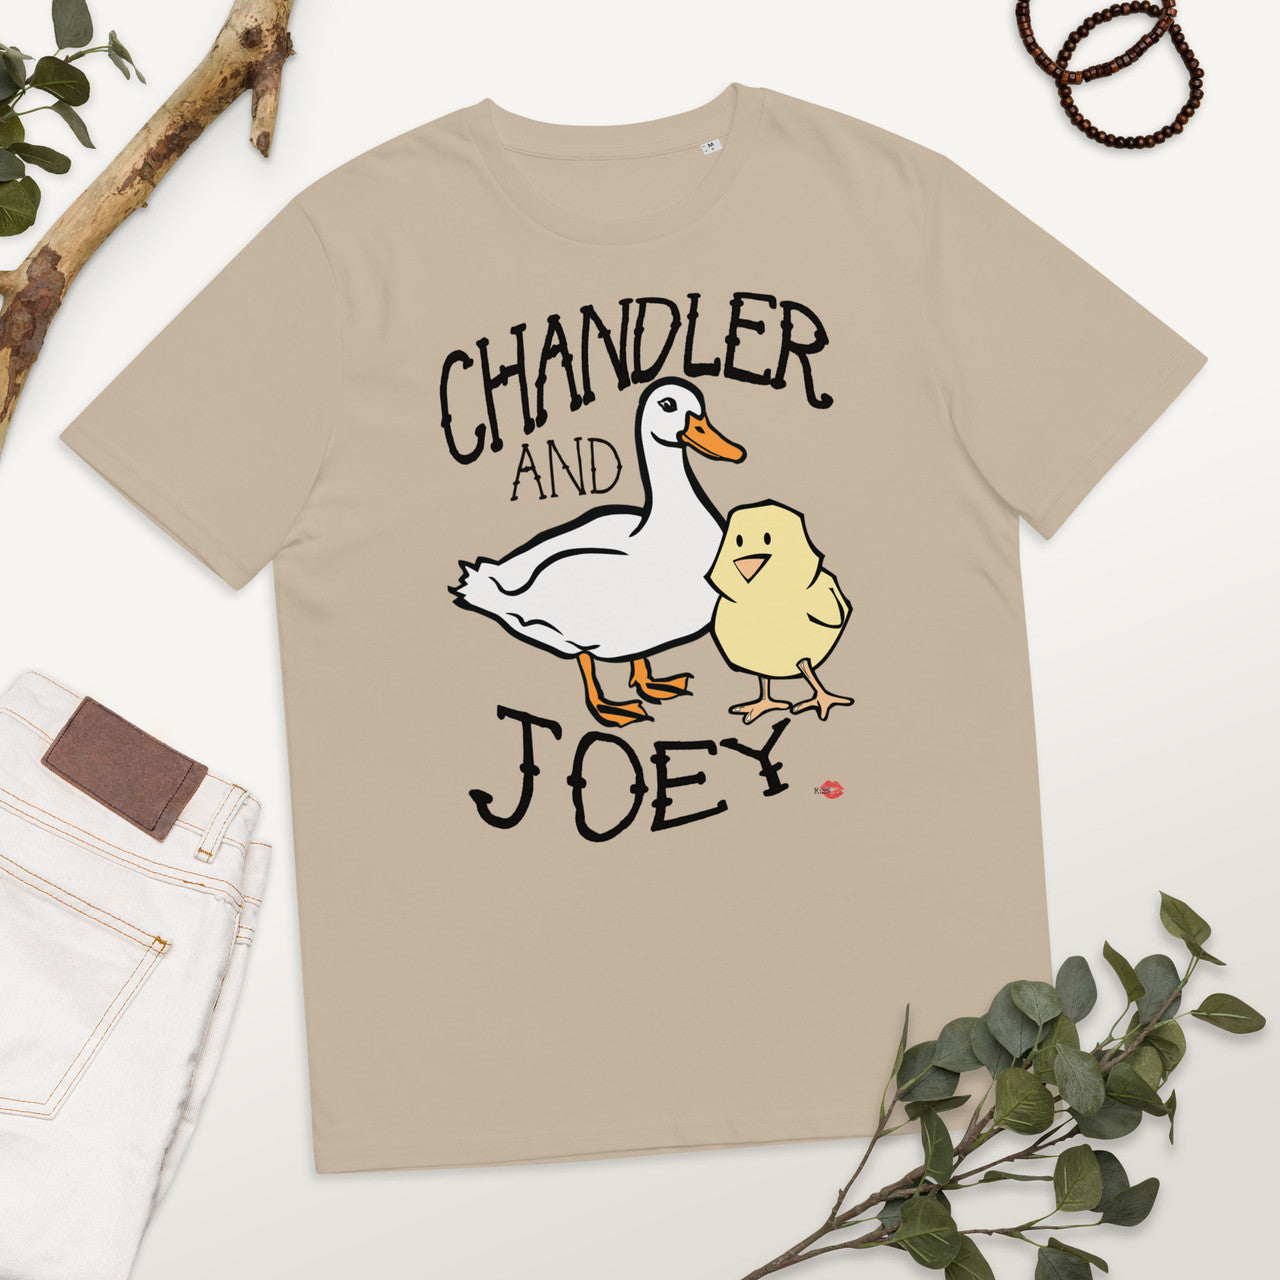 Joey and Chandler KiSS Unisex organic cotton t-shirt - Friends Show inspired Chick & Duck